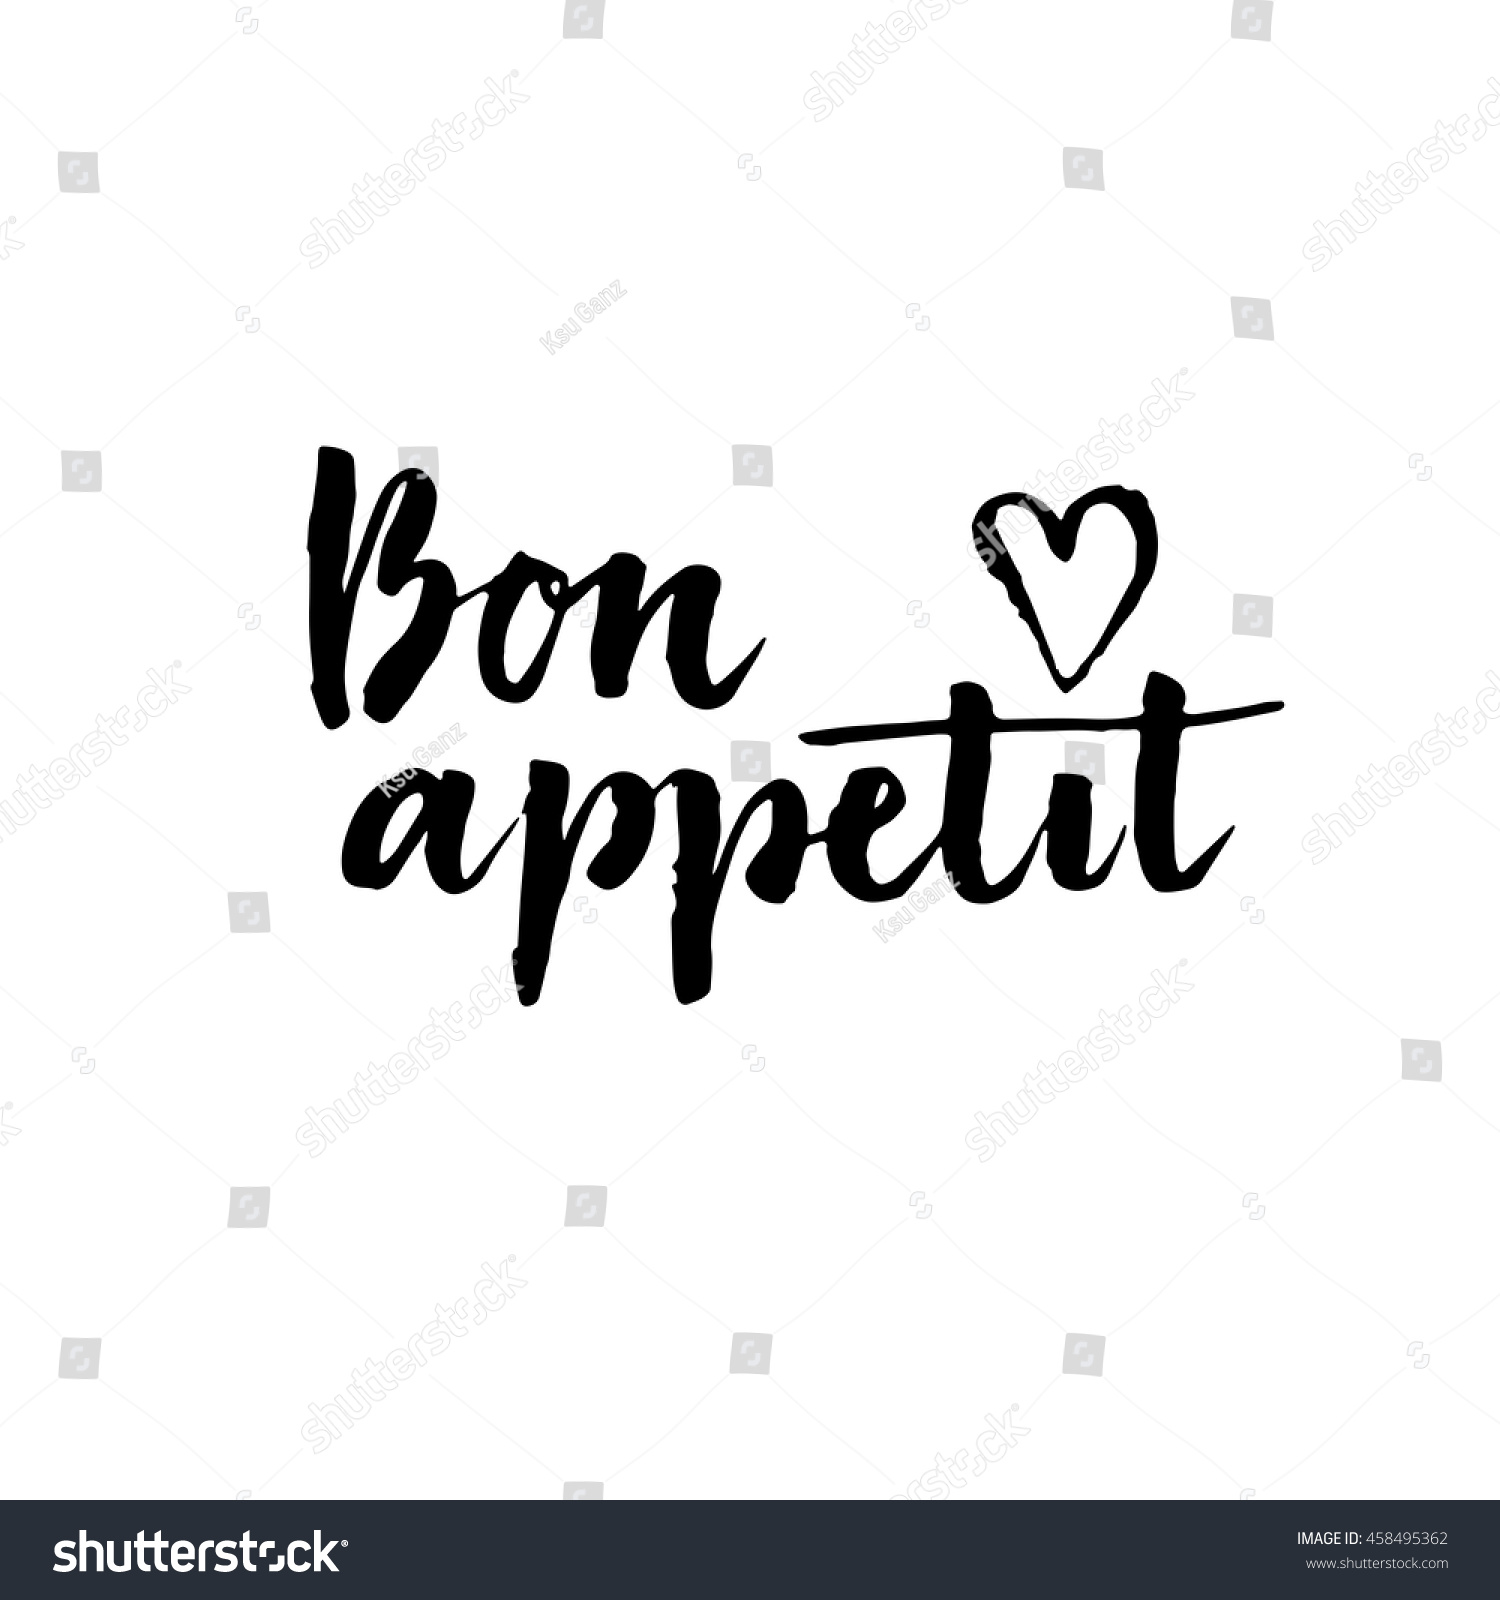 Bon Appetit Card Hand Drawn Lettering Stock Vector Royalty Free